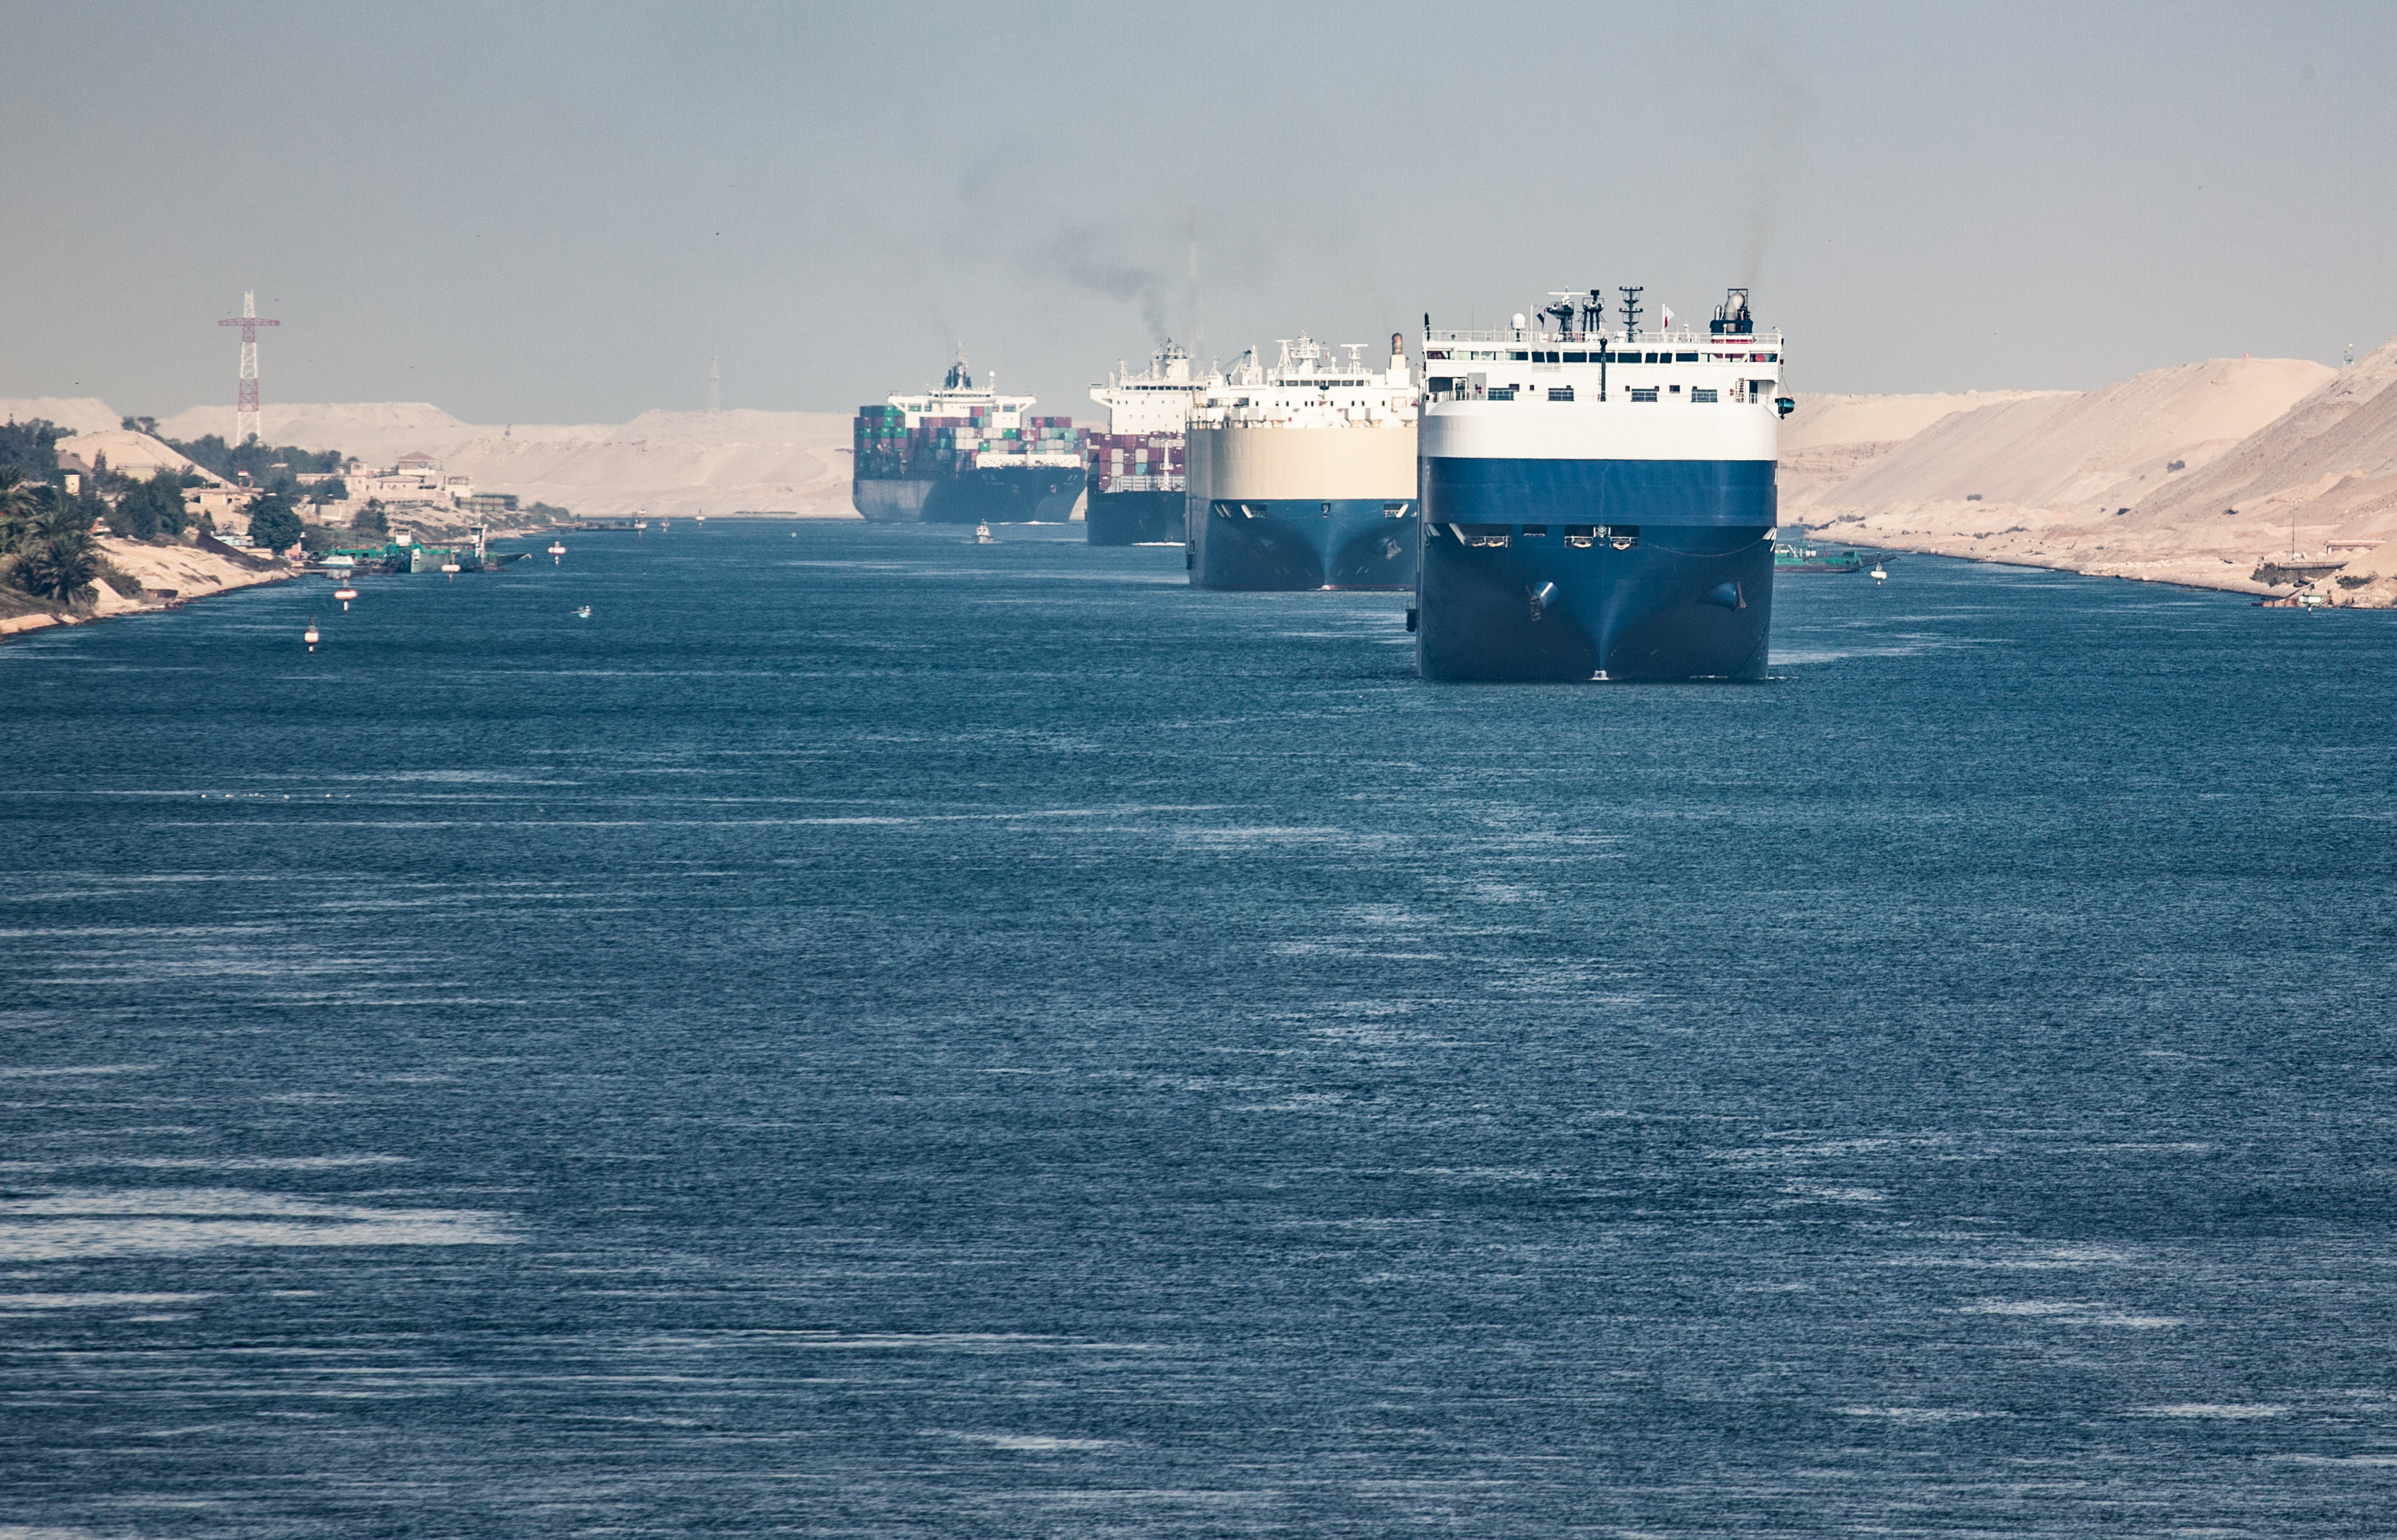 Egypt’s Suez Canal is one of the world’s most important waterways. File photo: Shutterstock